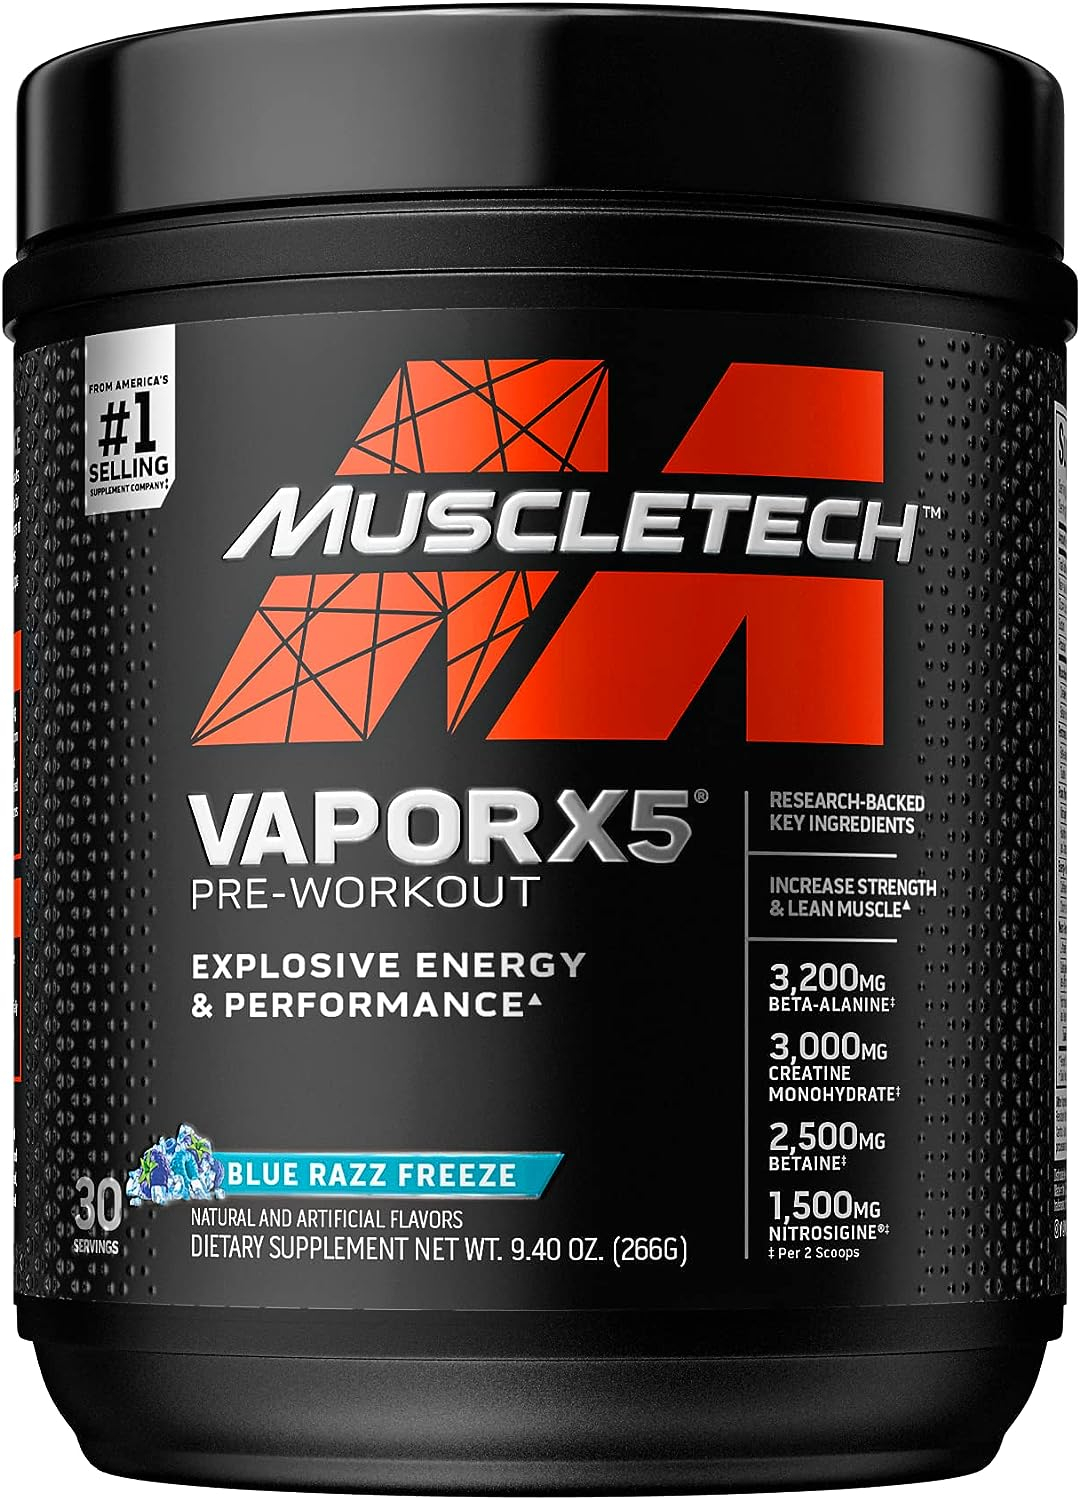 Pre Workout Powder | MuscleTech Vapor X5 | Pre Workout Powder for Men  Women | PreWorkout Energy Powder Drink Mix | Sports Nutrition Pre-Workout Products | Blue Raspberry (30 Servings)-Package Varies